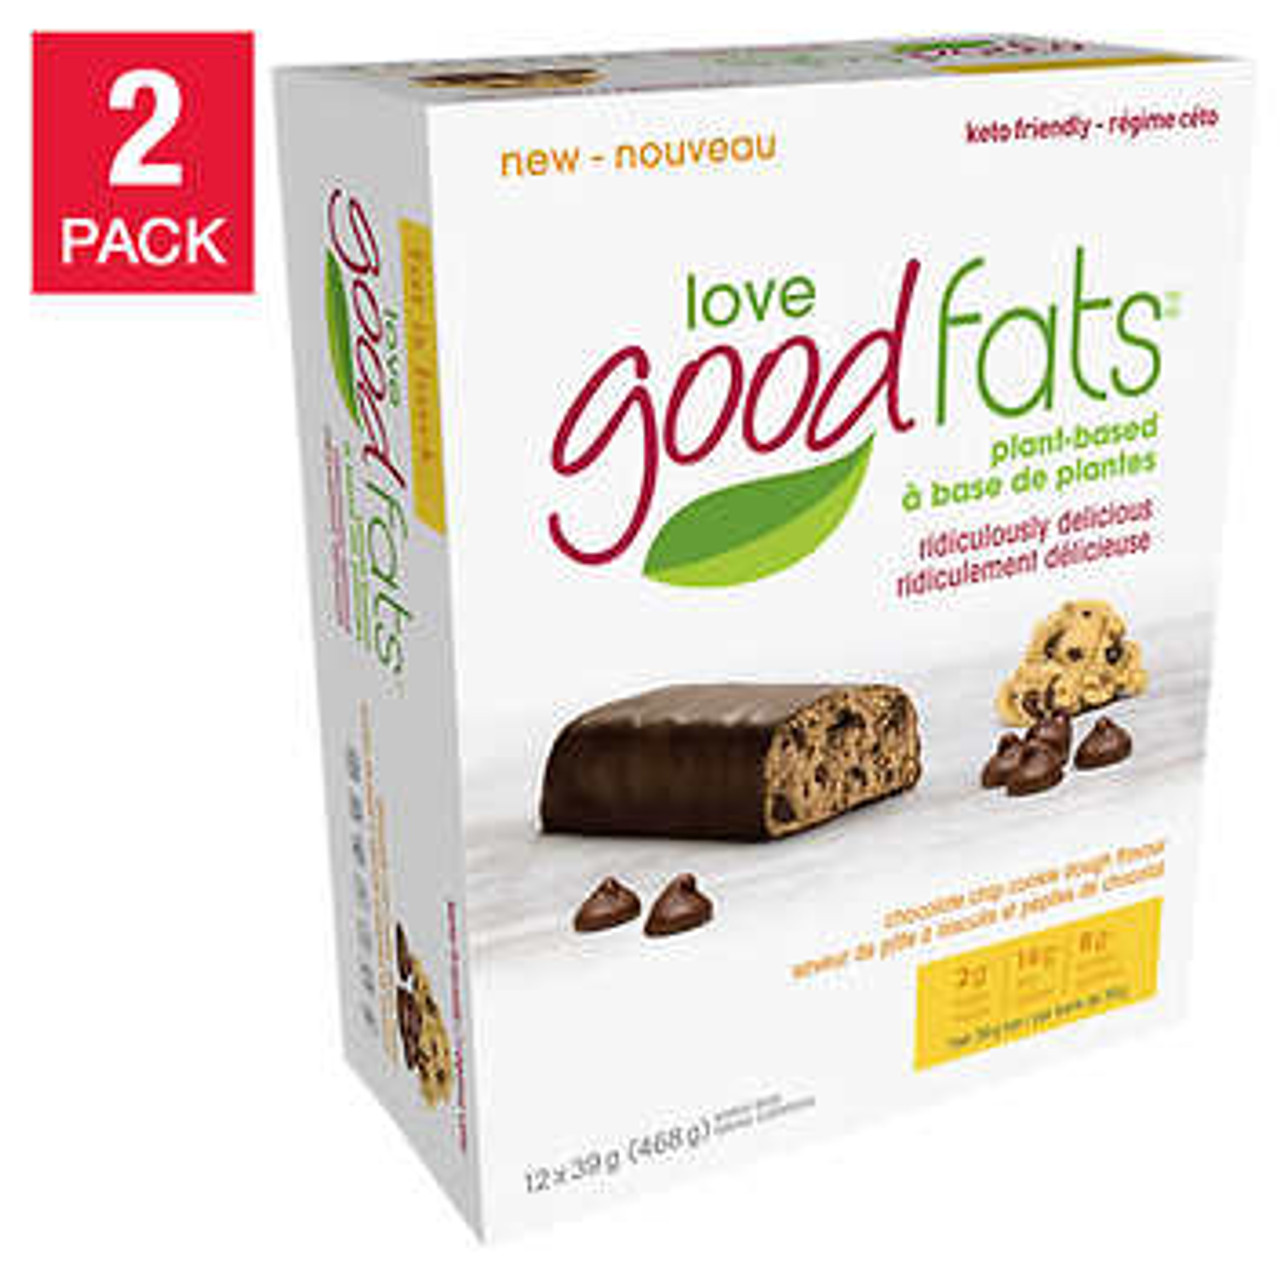 Love Good Fats Plant Based Chocolate Chip Cookie Dough Snack Bars - 2 Packs, 468g Total- Chicken Pieces